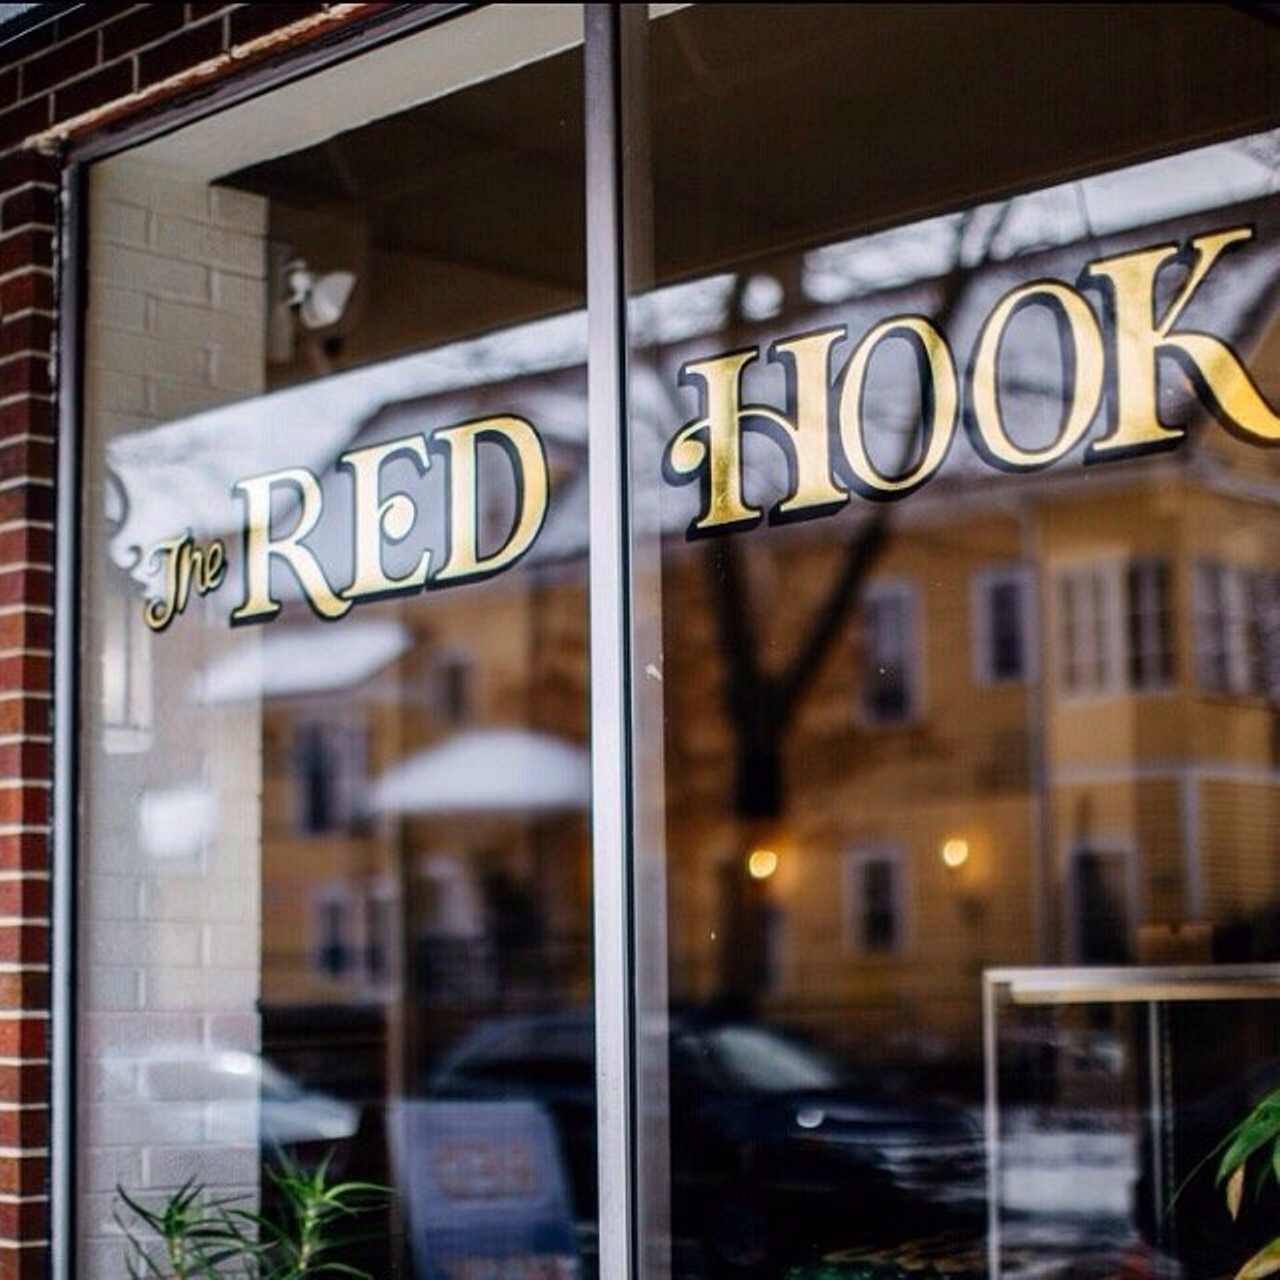 The Red Hook - 220 W. Nine Mile, Ferndale & 8025 Agnes, Detroit ,
Best known for their selection of delectable baked goods, The Red Hook serves up rich hot chocolate at their original Ferndale location and in Detroit&#146;s West Village. (Photo via Yelp, Sandy H.)